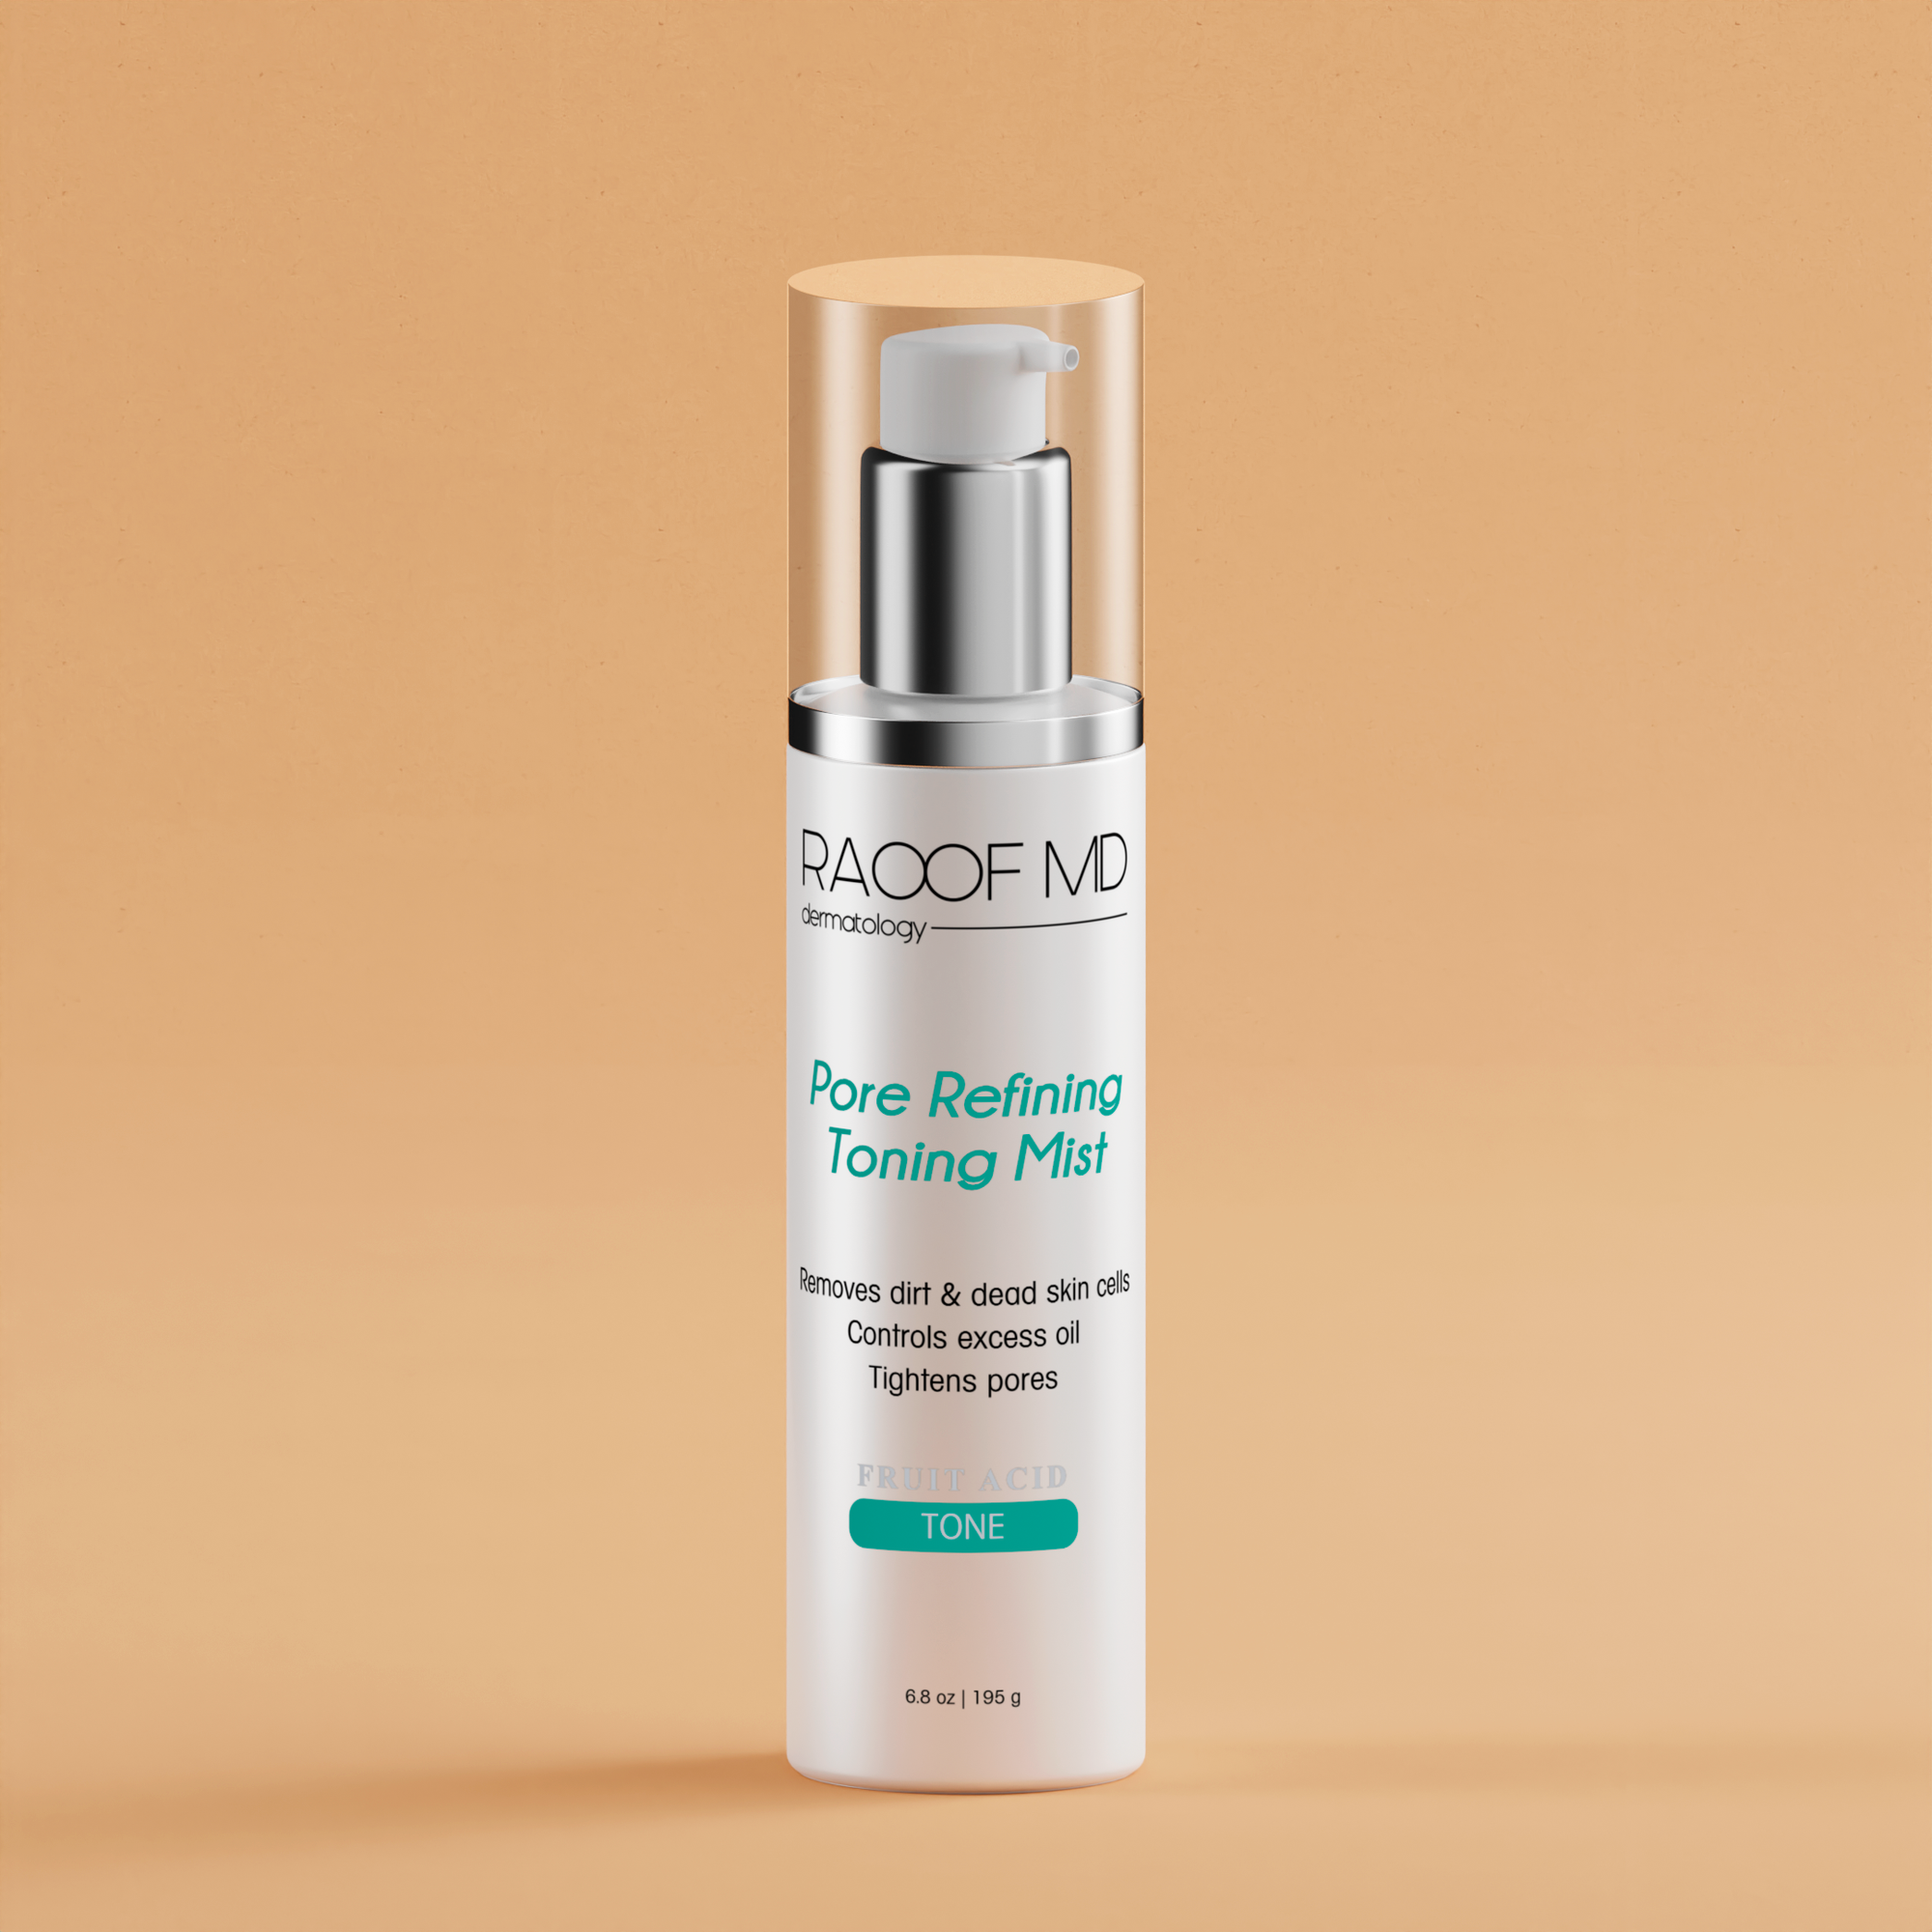 Pore Refining Toning Mist by RAOOF MD dermatology